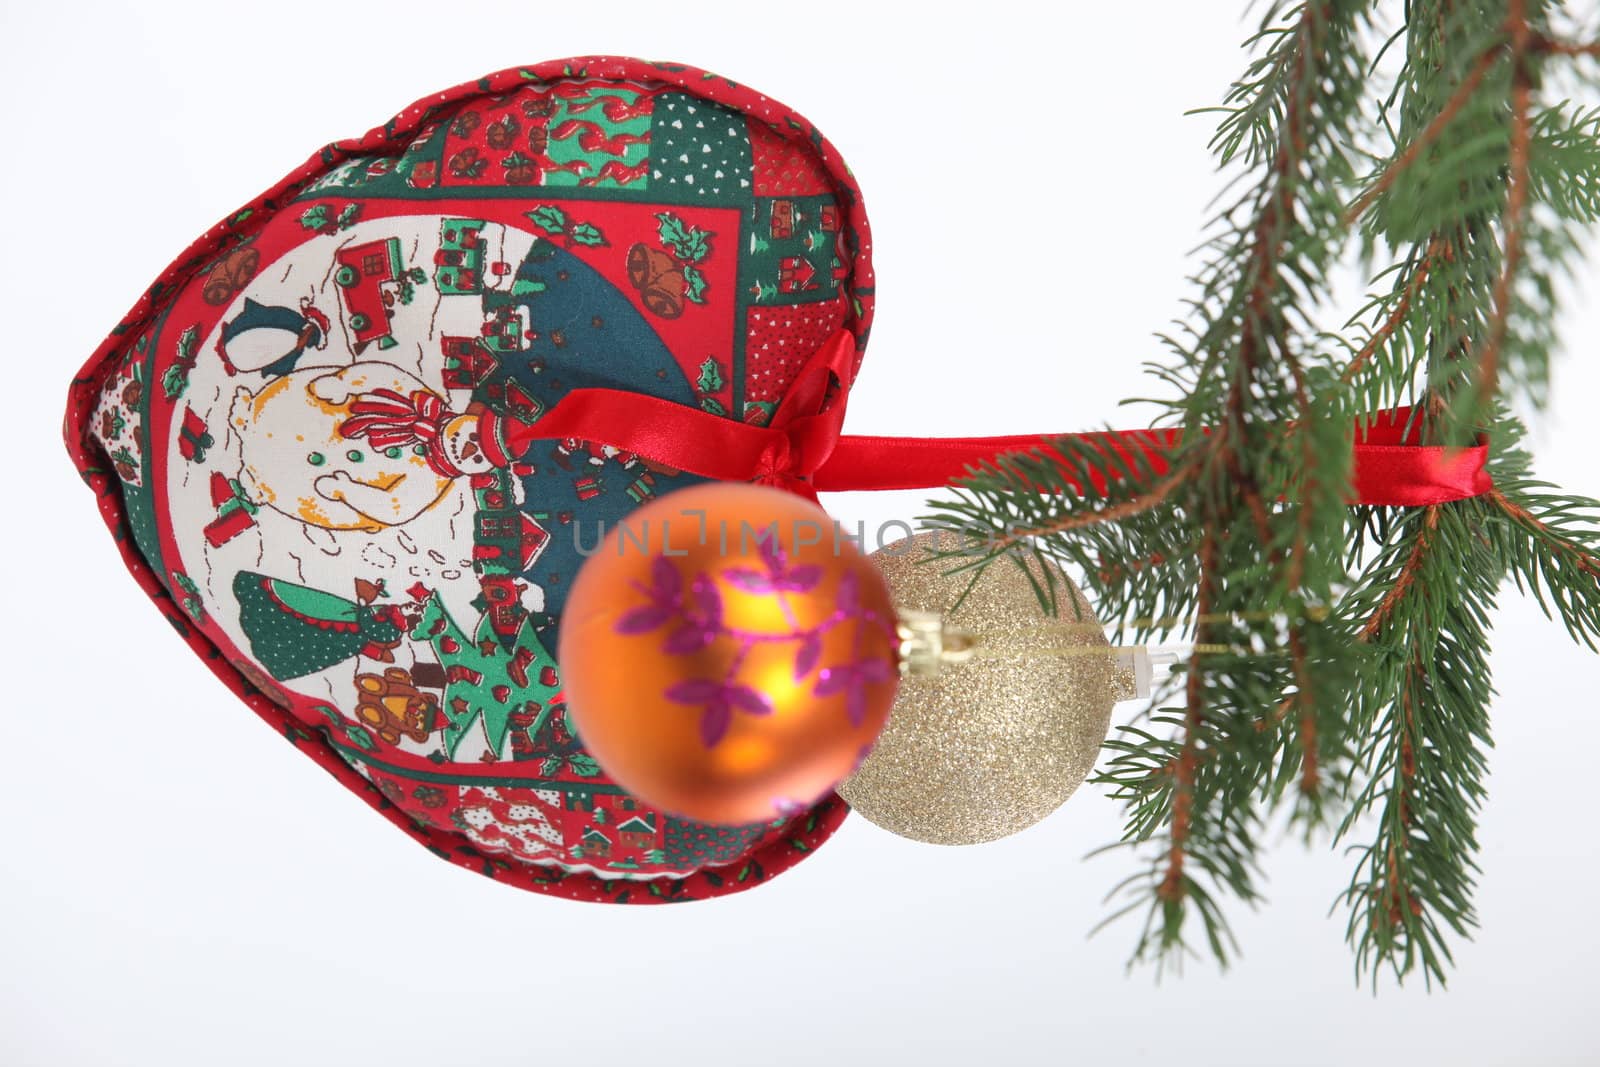 Christmas tree decoration by phovoir